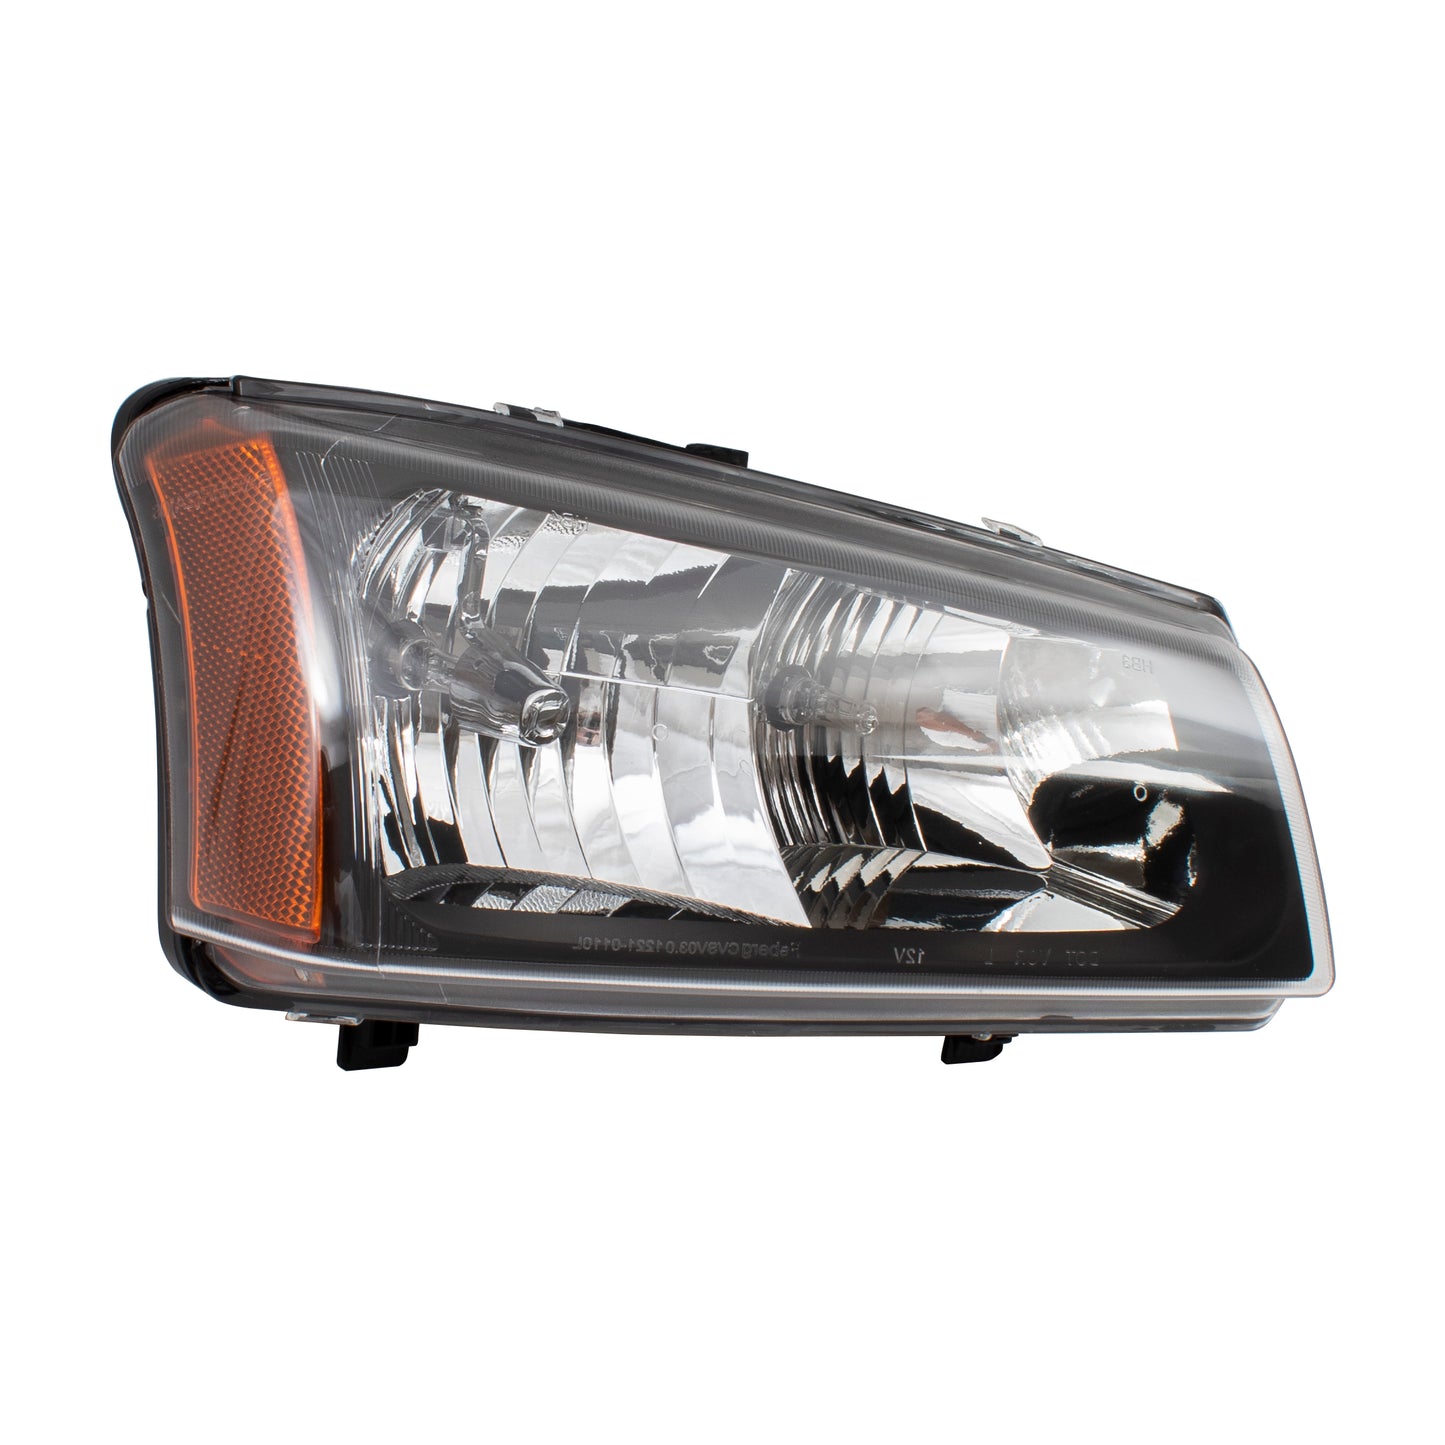 Brock Replacement Passengers Halogen Headlight Compatible with 03-06 Avalanche Silverado 07 Classic